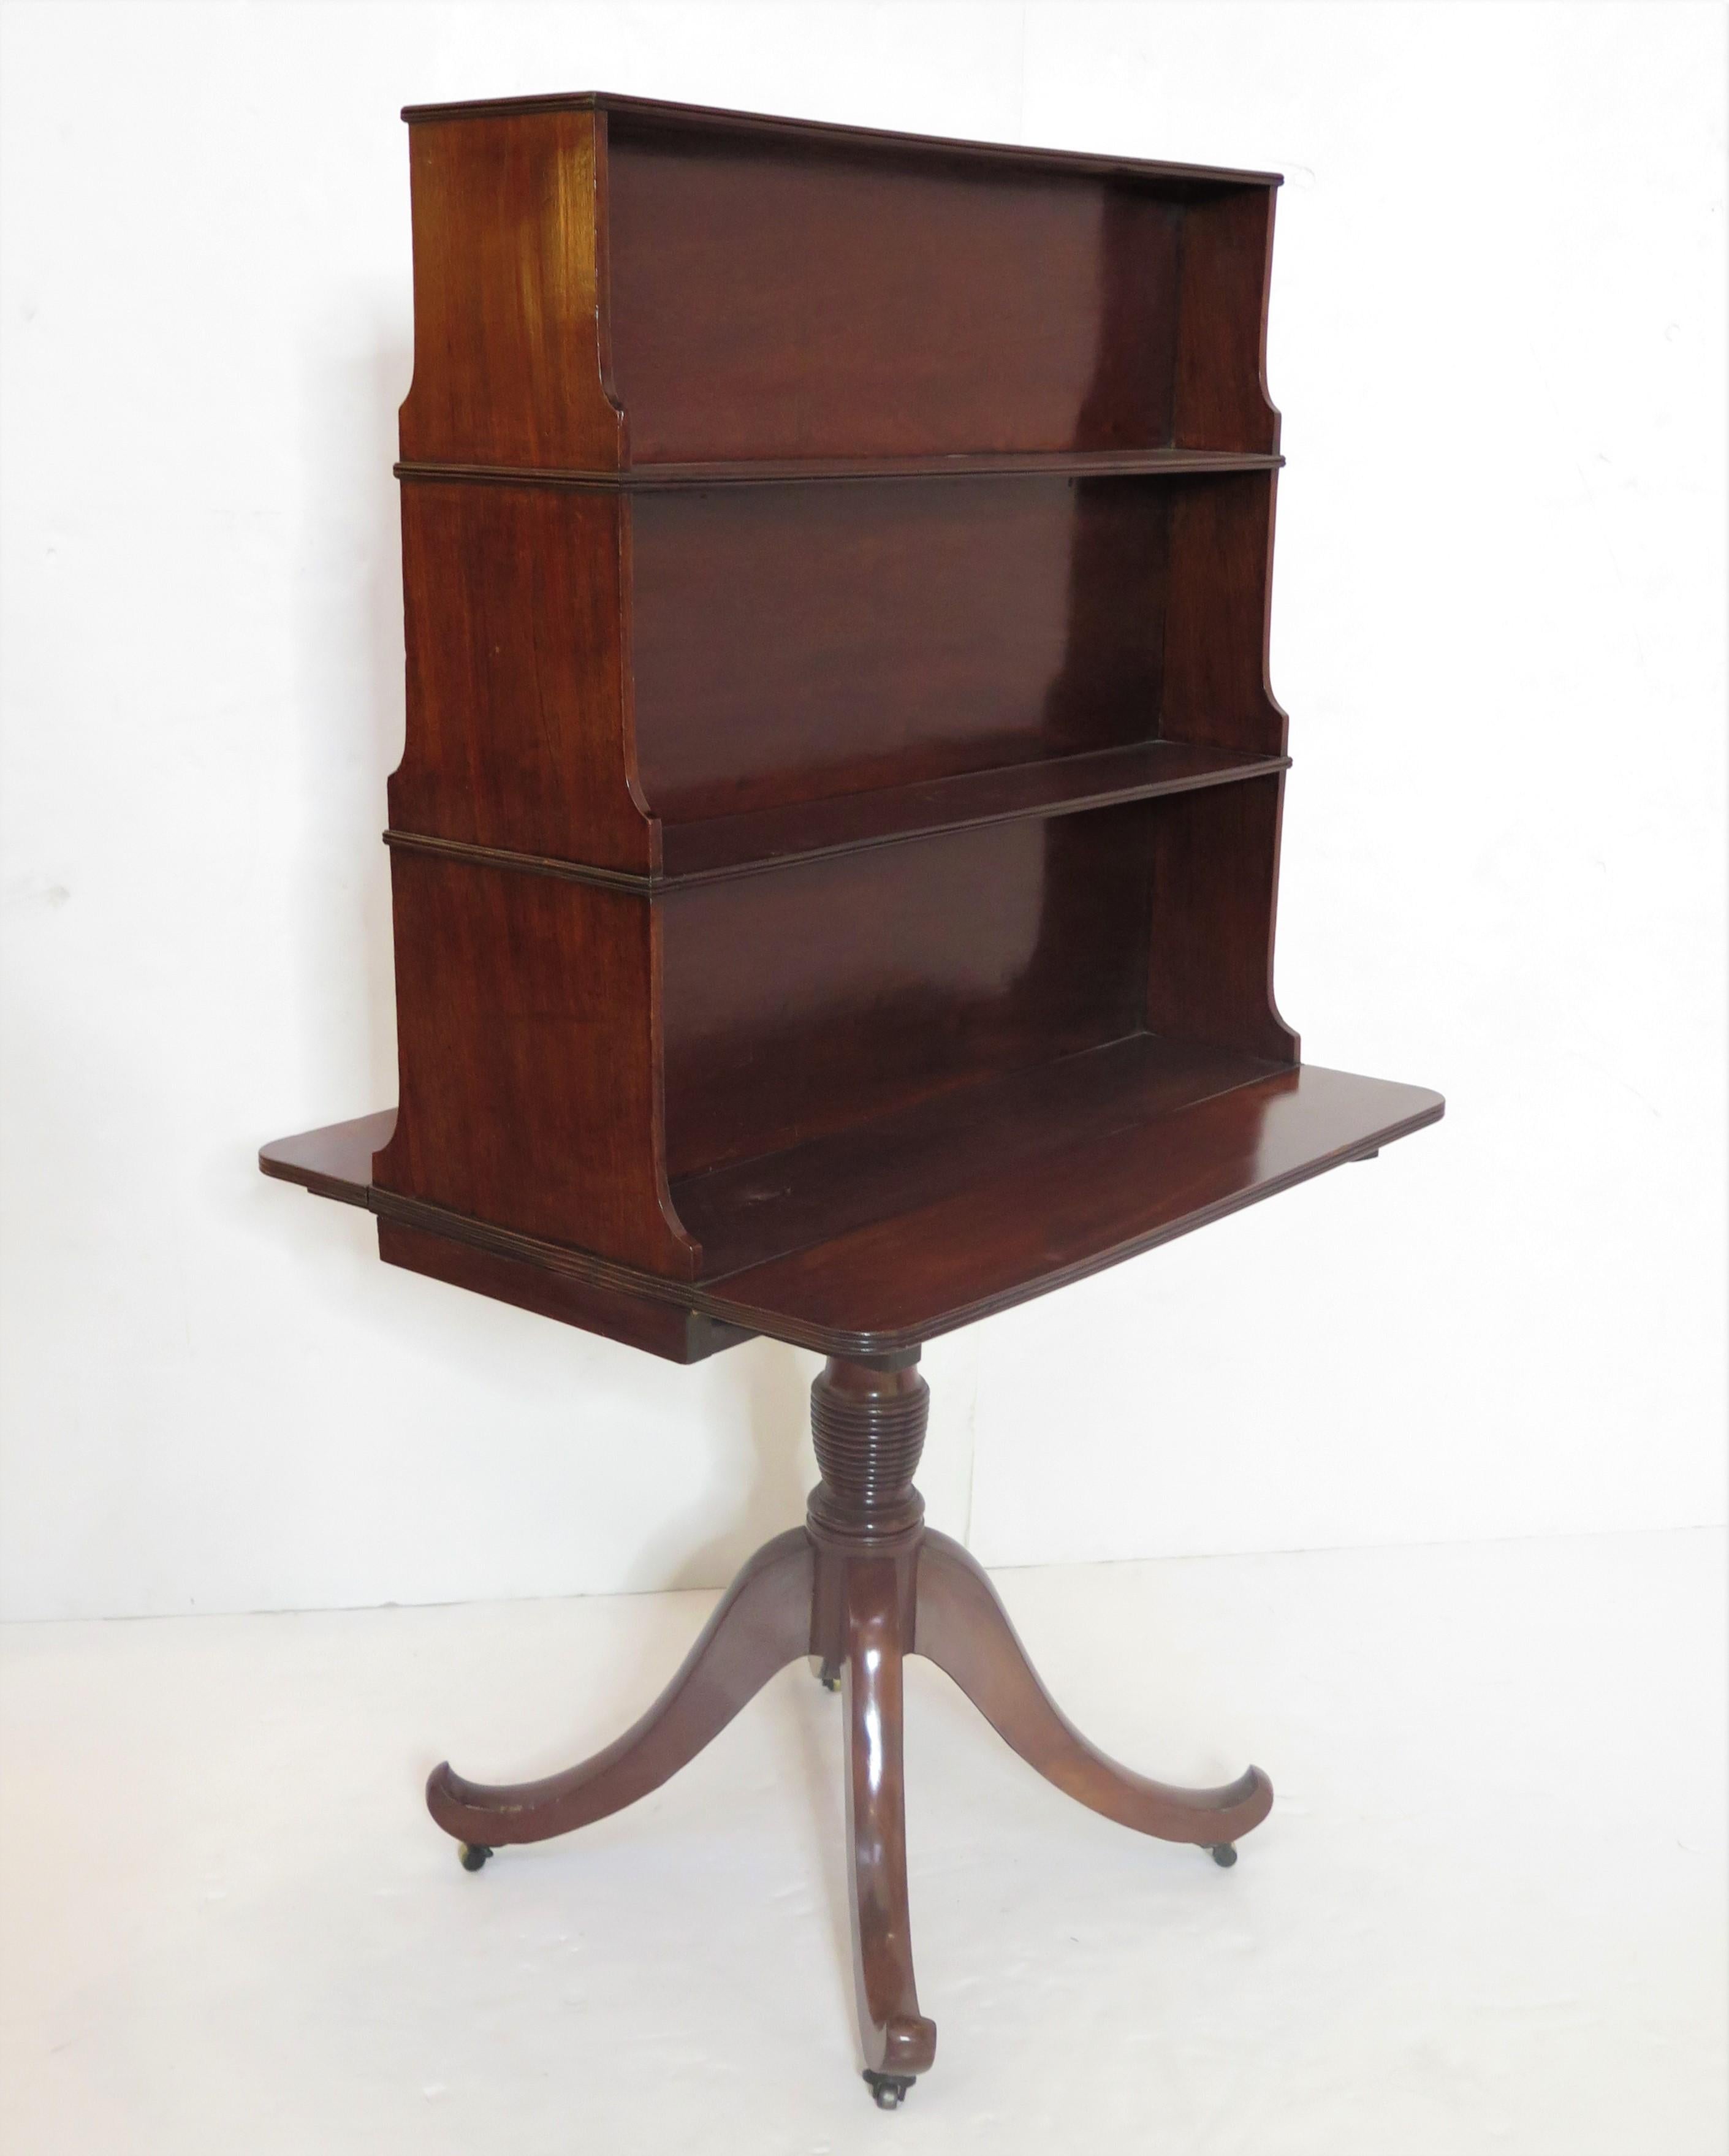 a late 18th century George III freestanding mahogany pedestal waterfall bookcase, unusual form, with small drop leaves, the case consists of three (3) graduating storage compartments on each side, six (6) total, and rests atop a turned column with